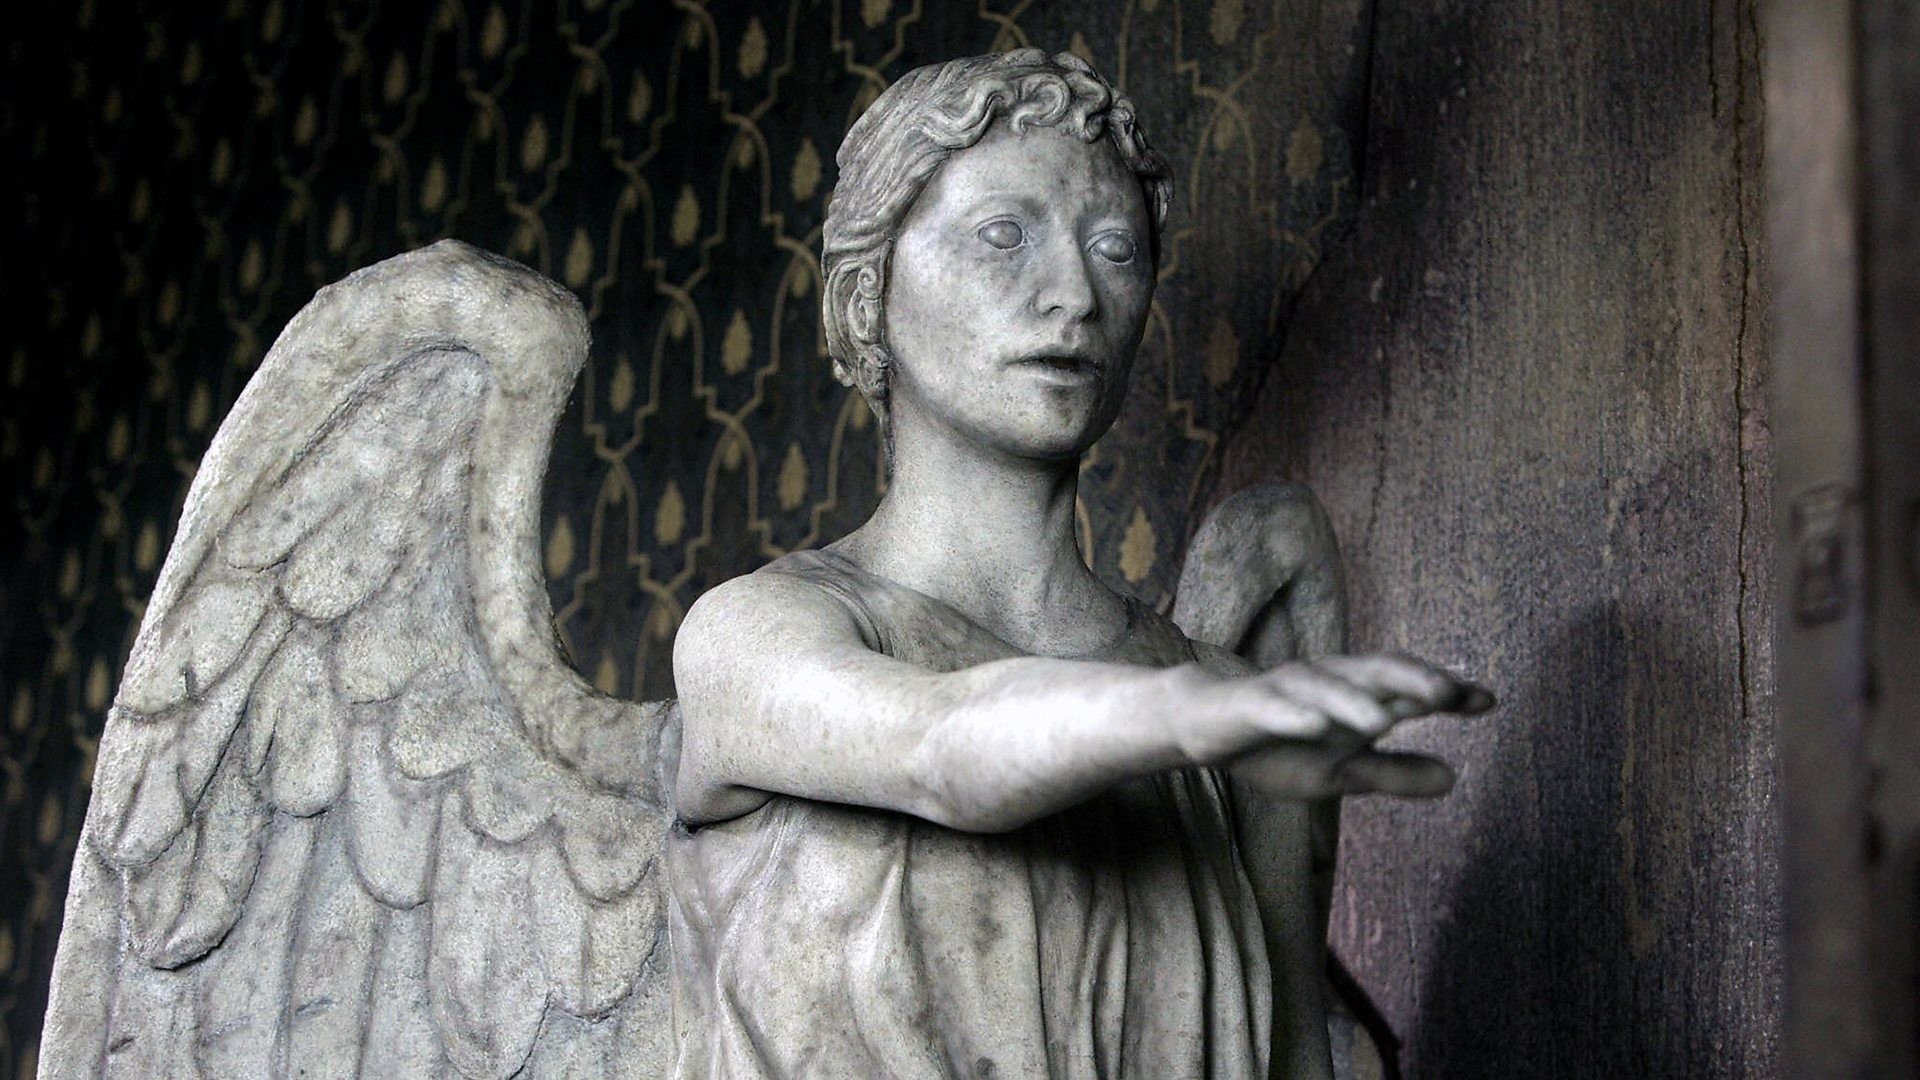 1920x1080 BBC Radio 4 - Radio 4 in Four, Where did the idea for the Weeping Angels  come from?